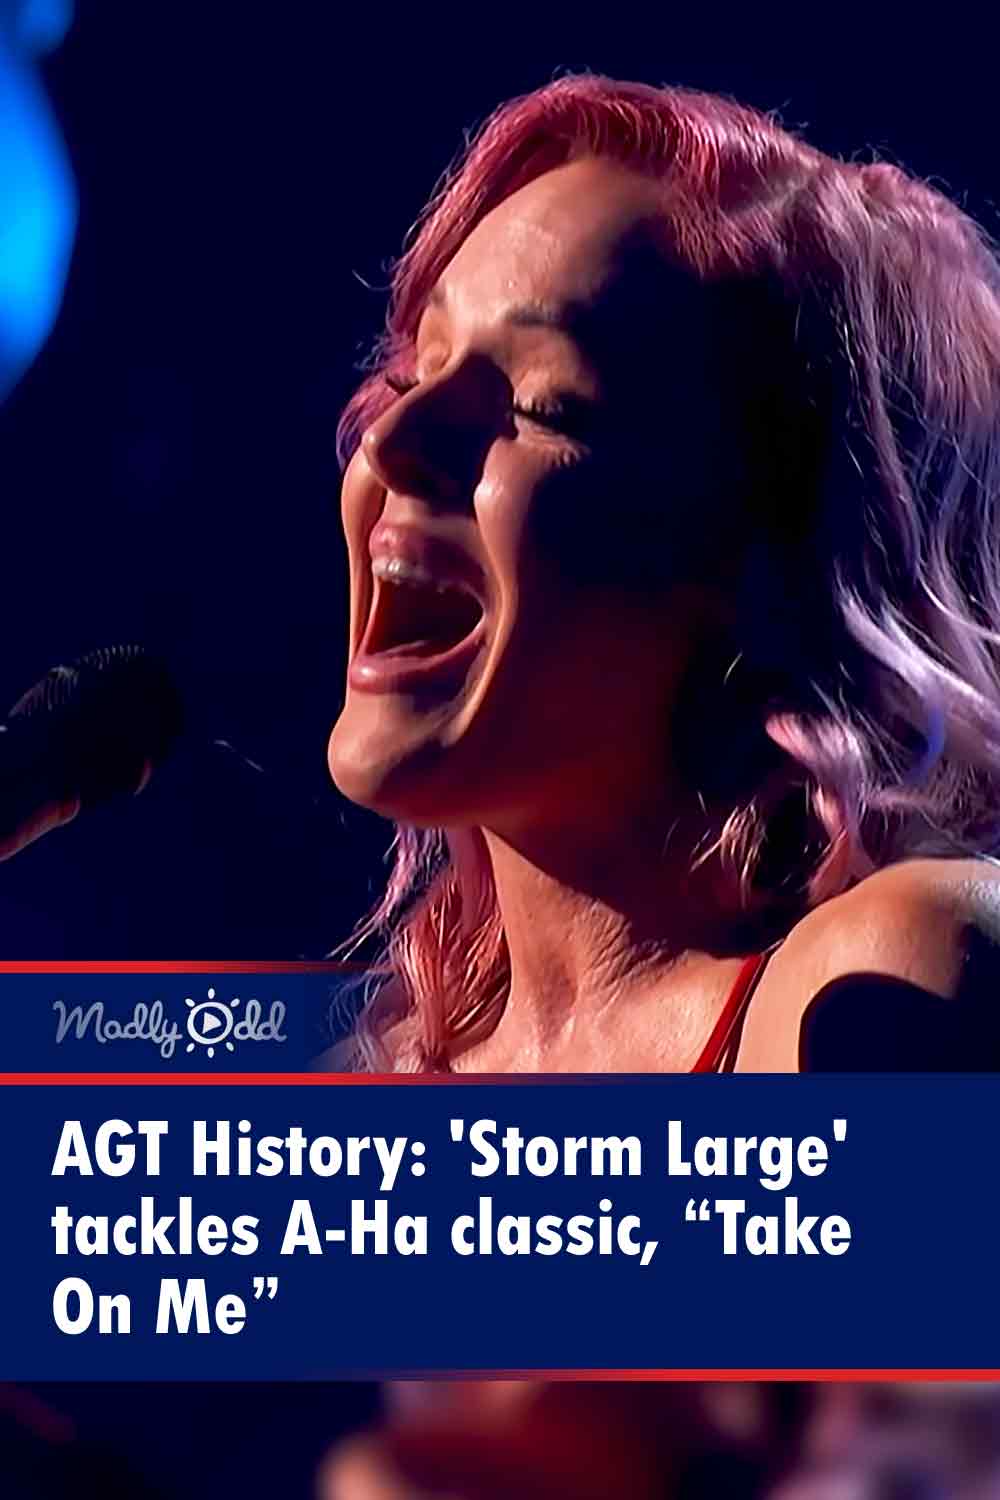 AGT History: \'Storm Large\' tackles A-Ha classic, “Take On Me”